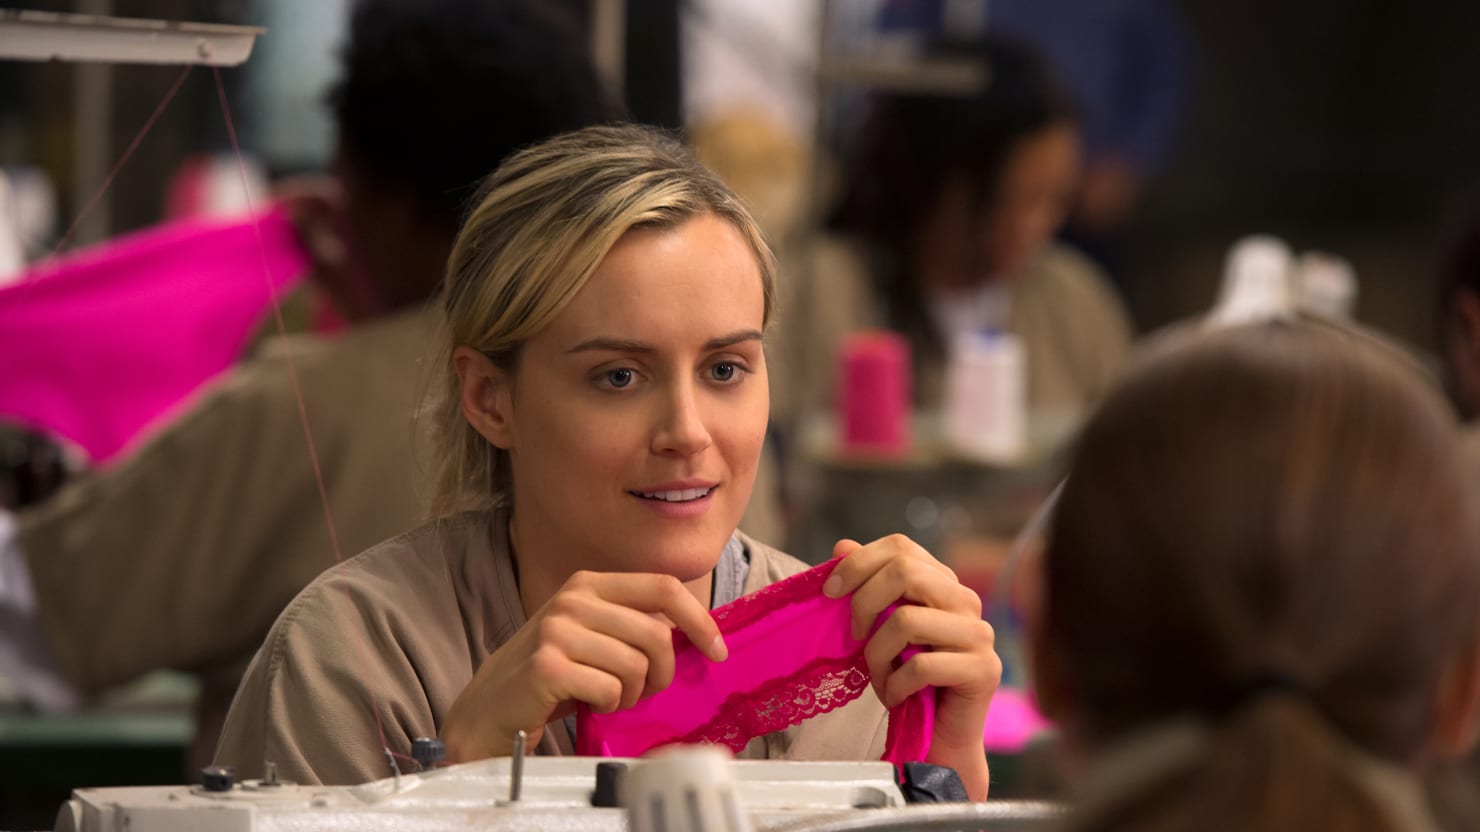 OITNBs Used-Panty Business Is Real The Shocking True Story Behind the Shows Prison Panty Ring